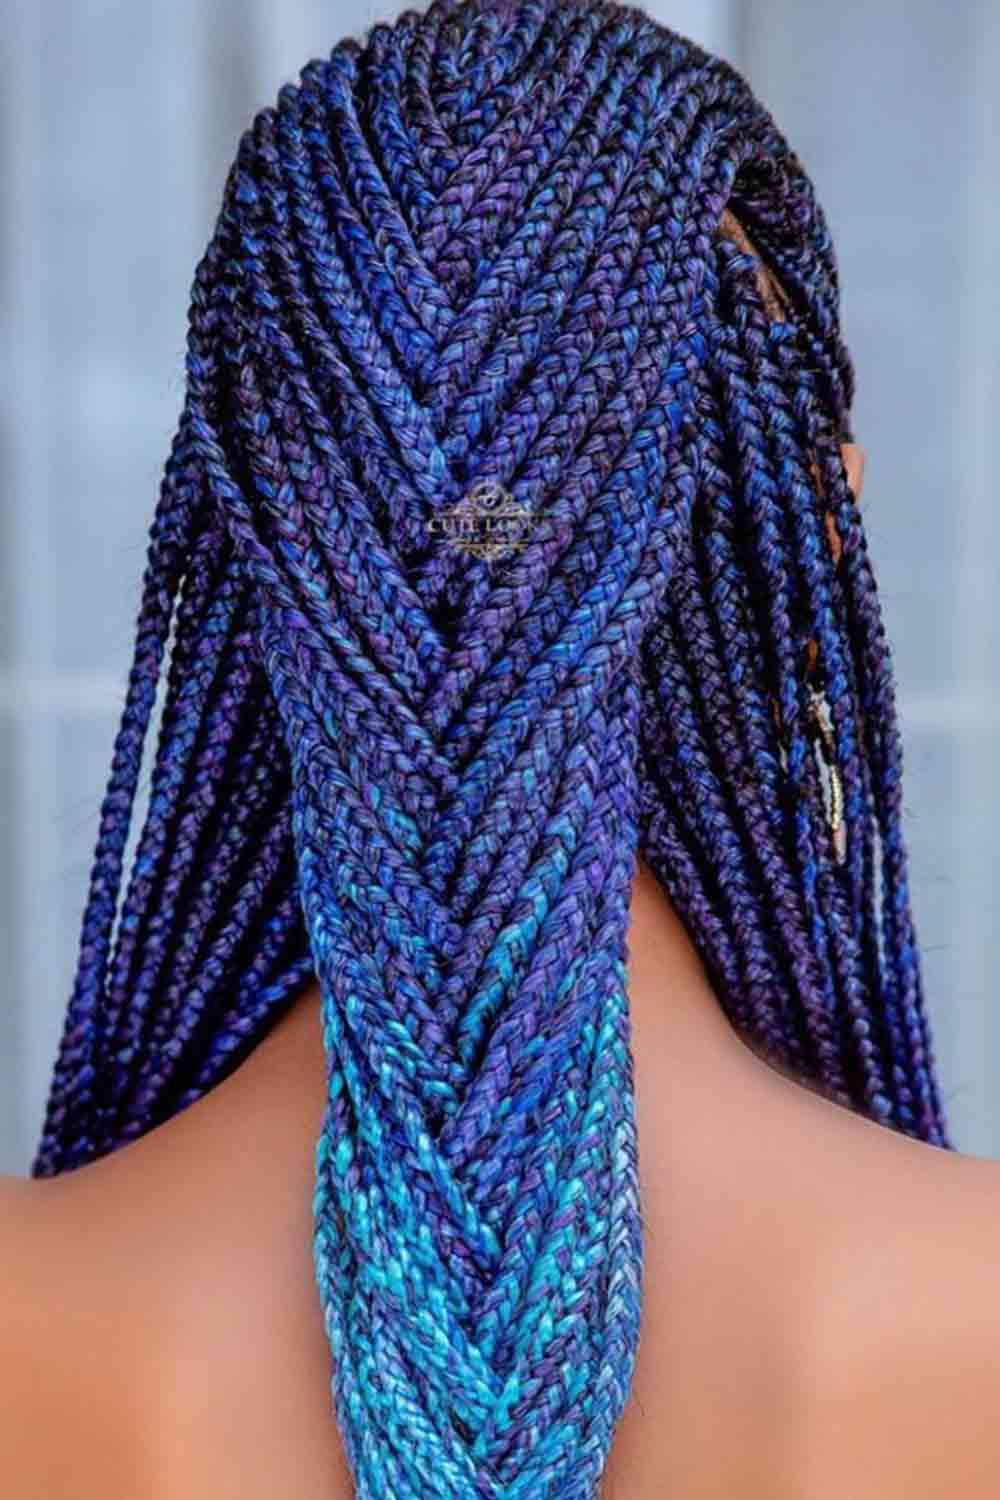 Blue Fulani Braids With Ombre Effect #ombrehair #bluehairstyles